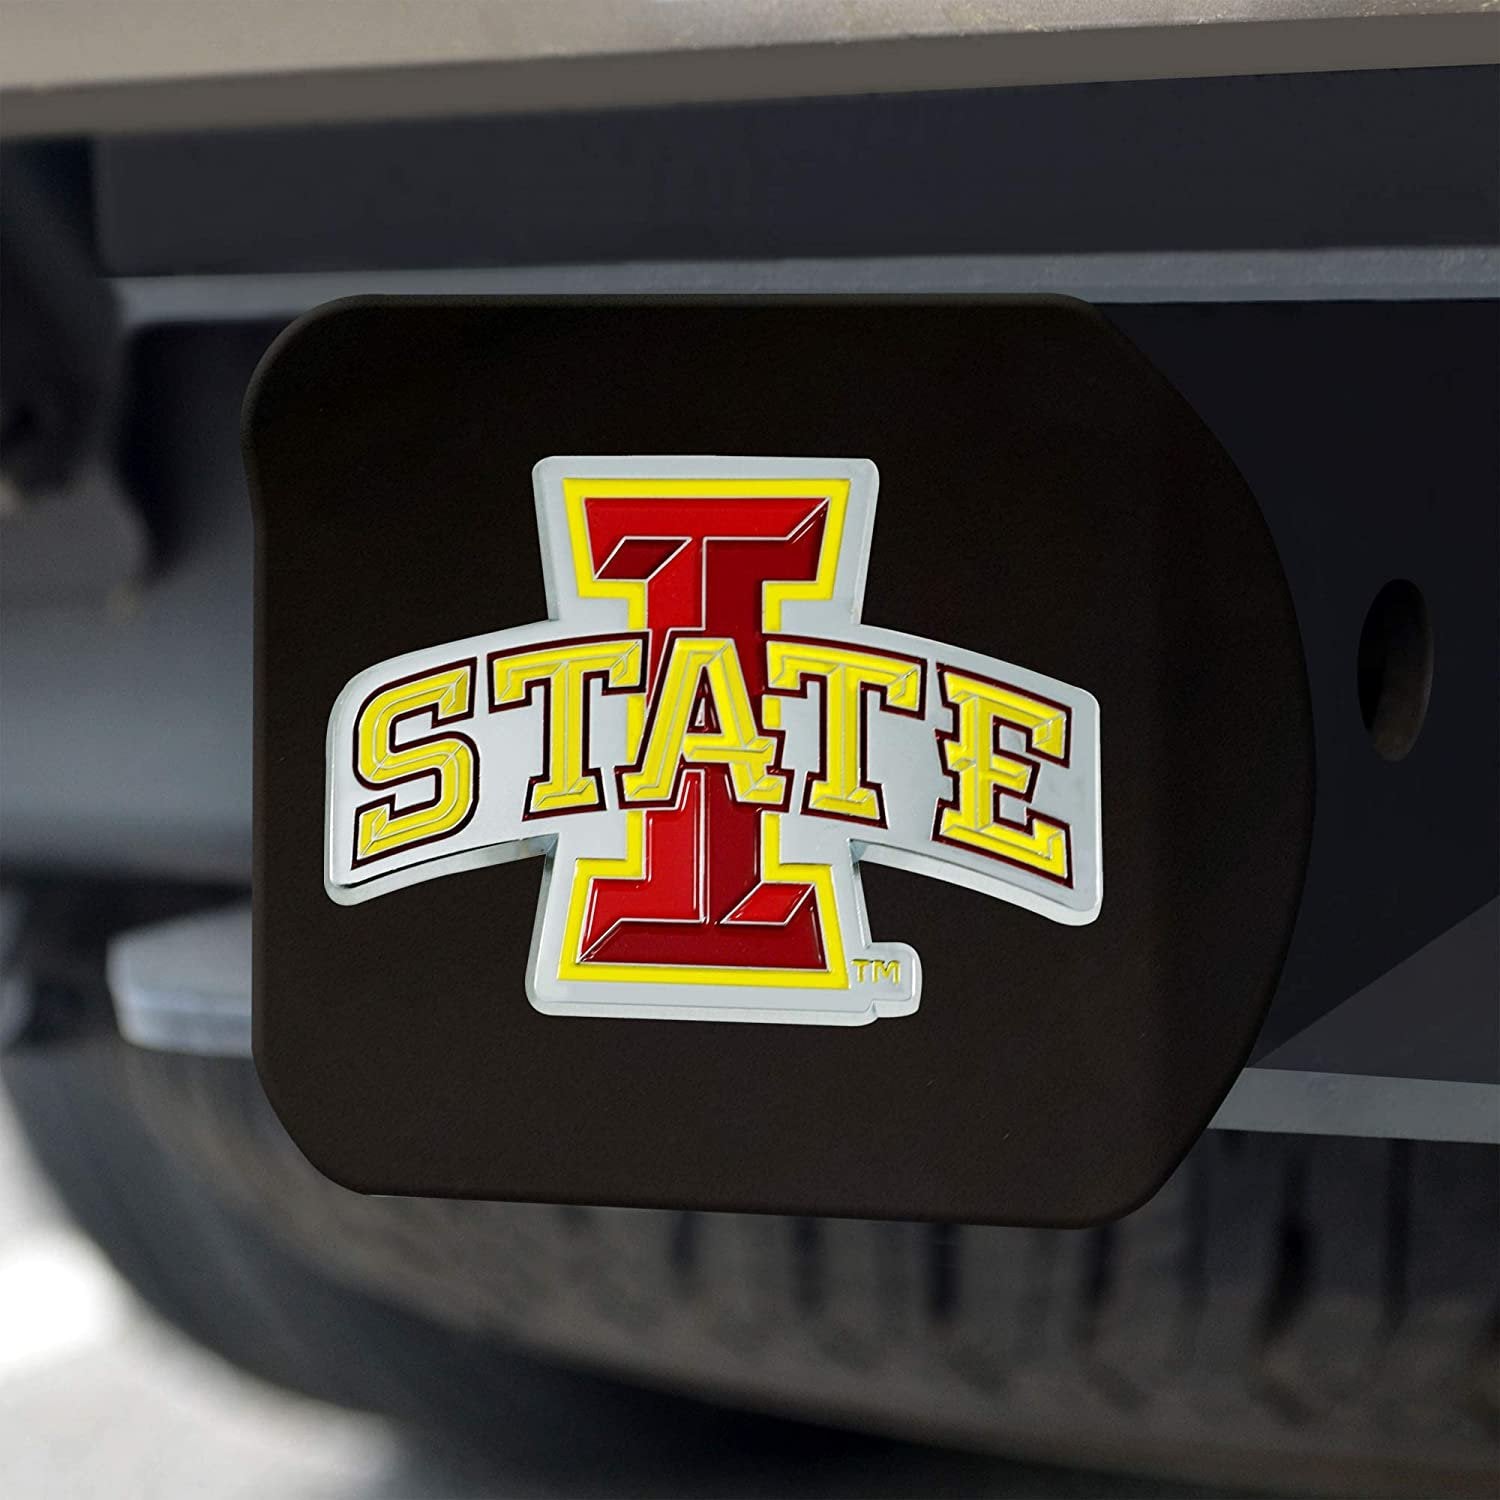 Iowa State Cyclones Hitch Cover Black Solid Metal with Raised Color Metal Emblem 2" Square Type III University